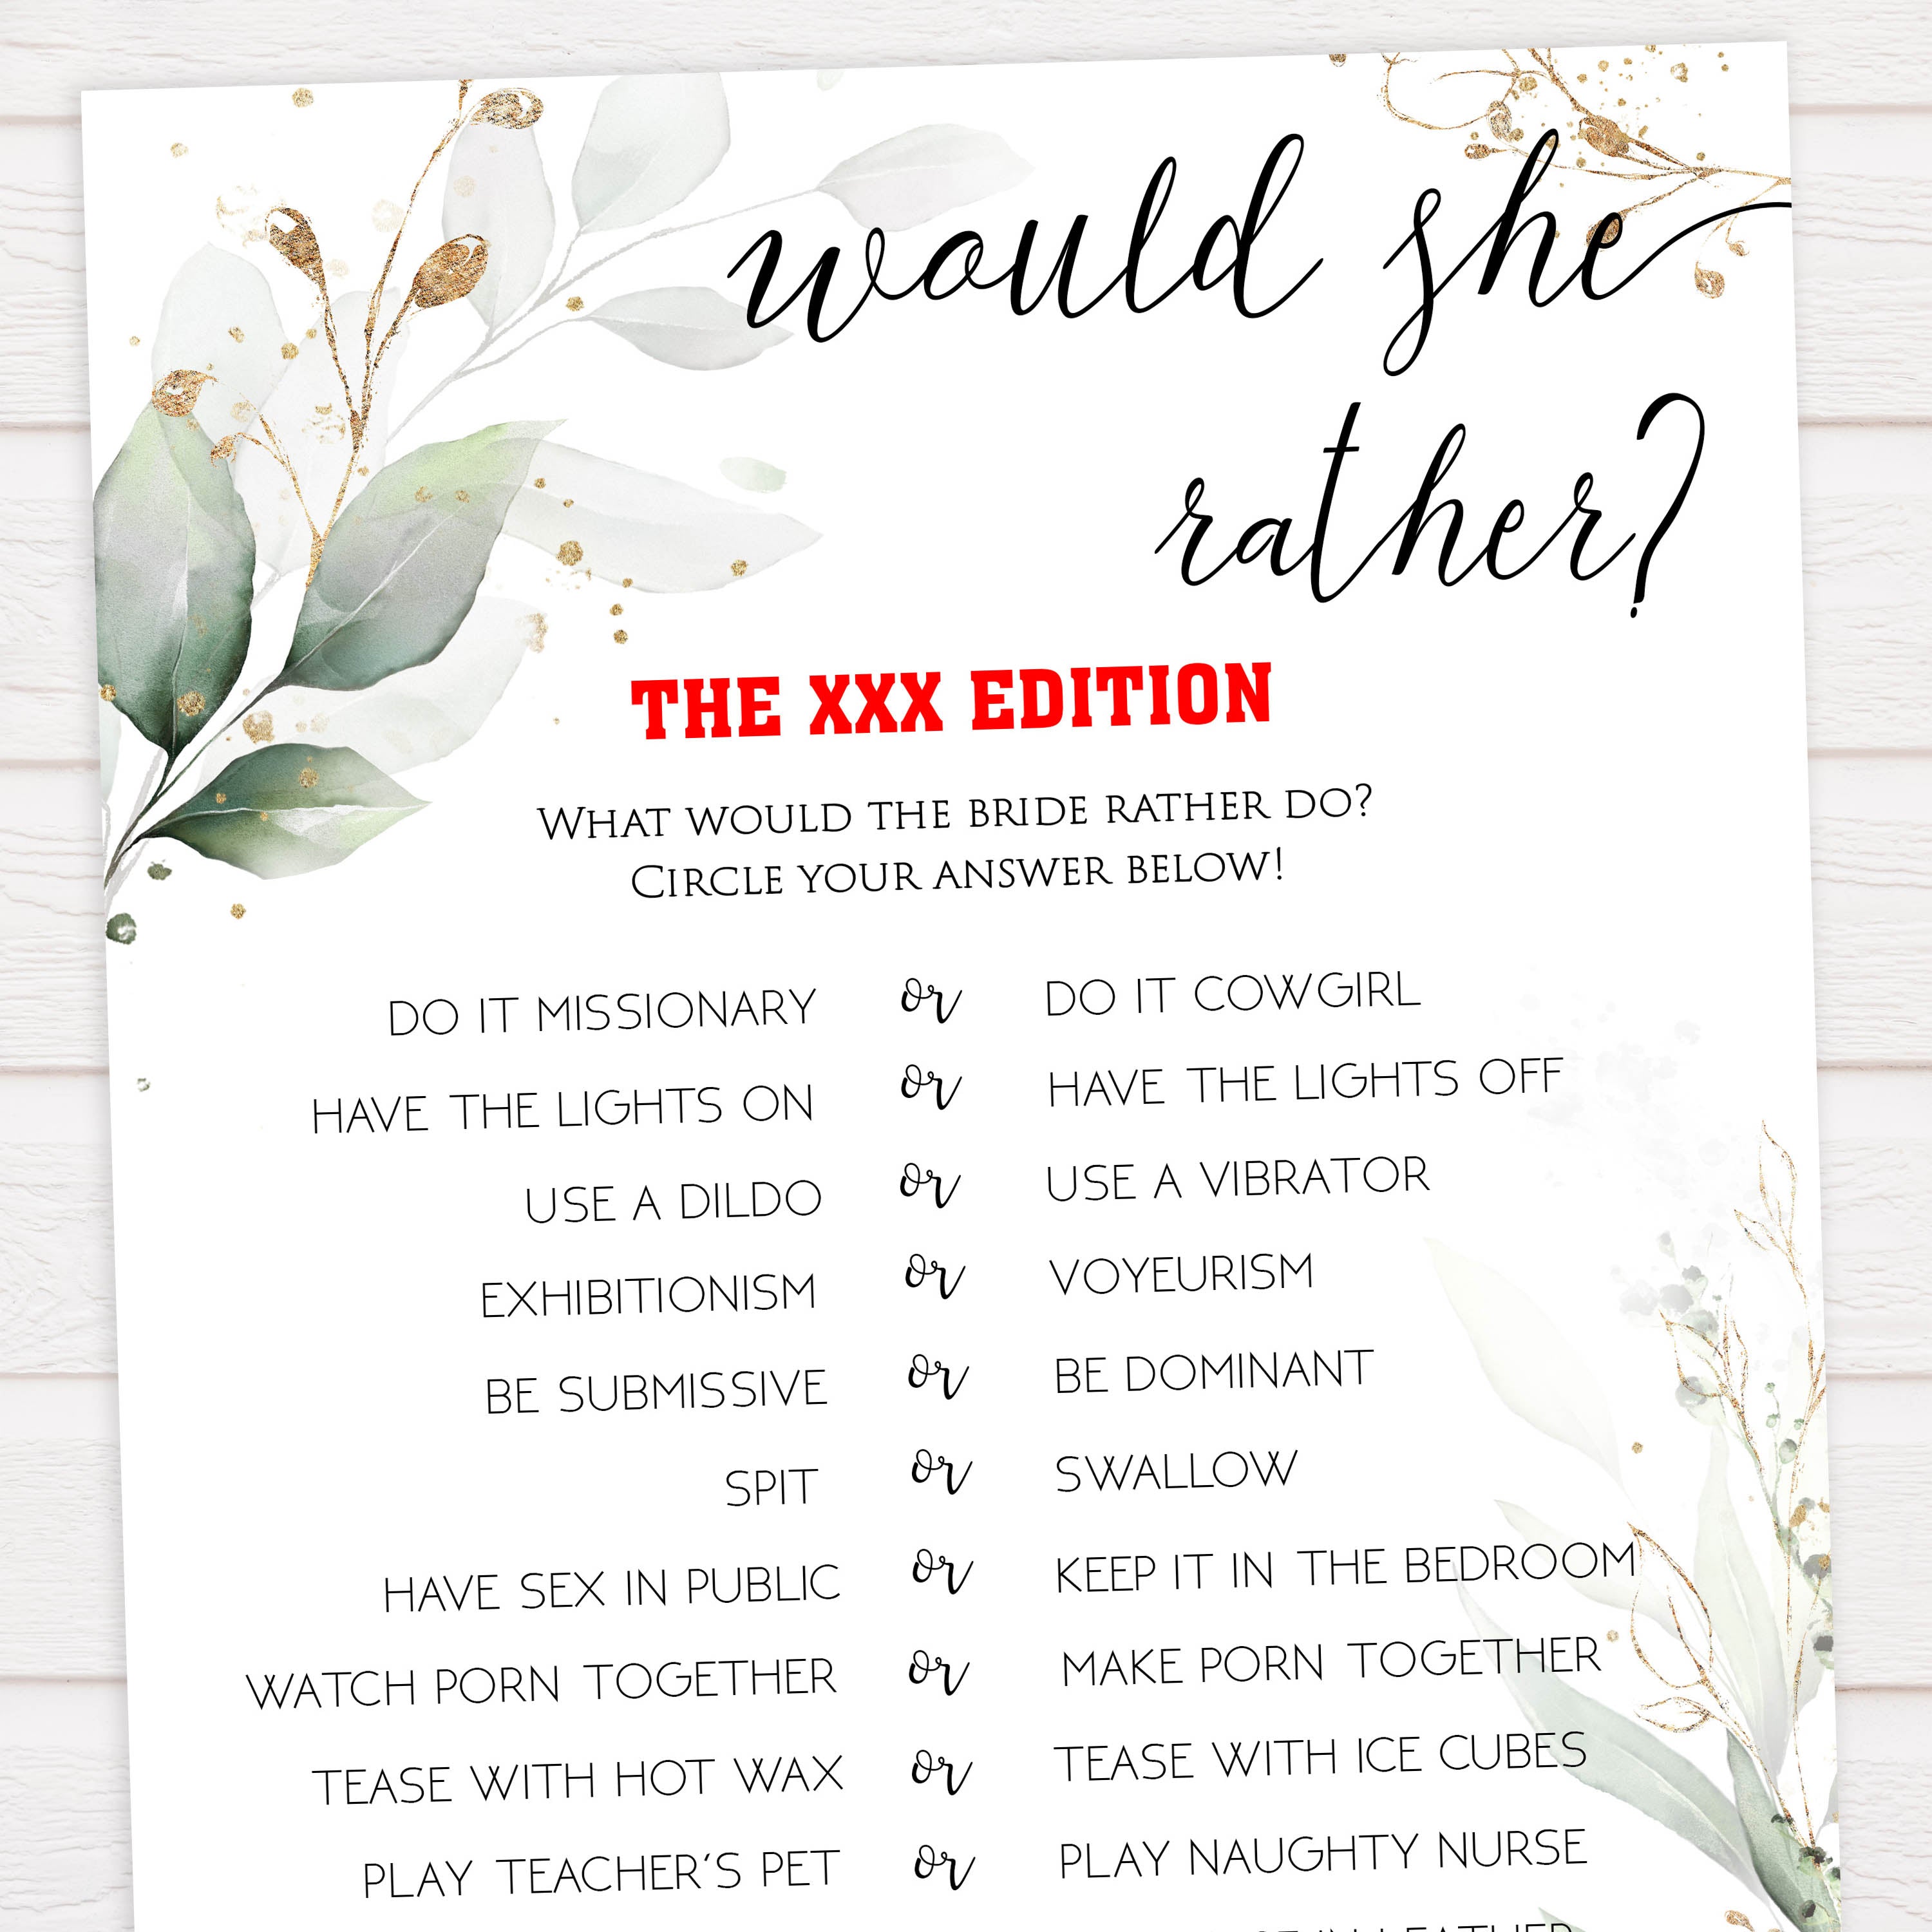 naughty would she rather game, Printable bachelorette games, greenery bachelorette, gold leaf hen party games, fun hen party games, bachelorette game ideas, greenery adult party games, naughty hen games, naughty bachelorette games